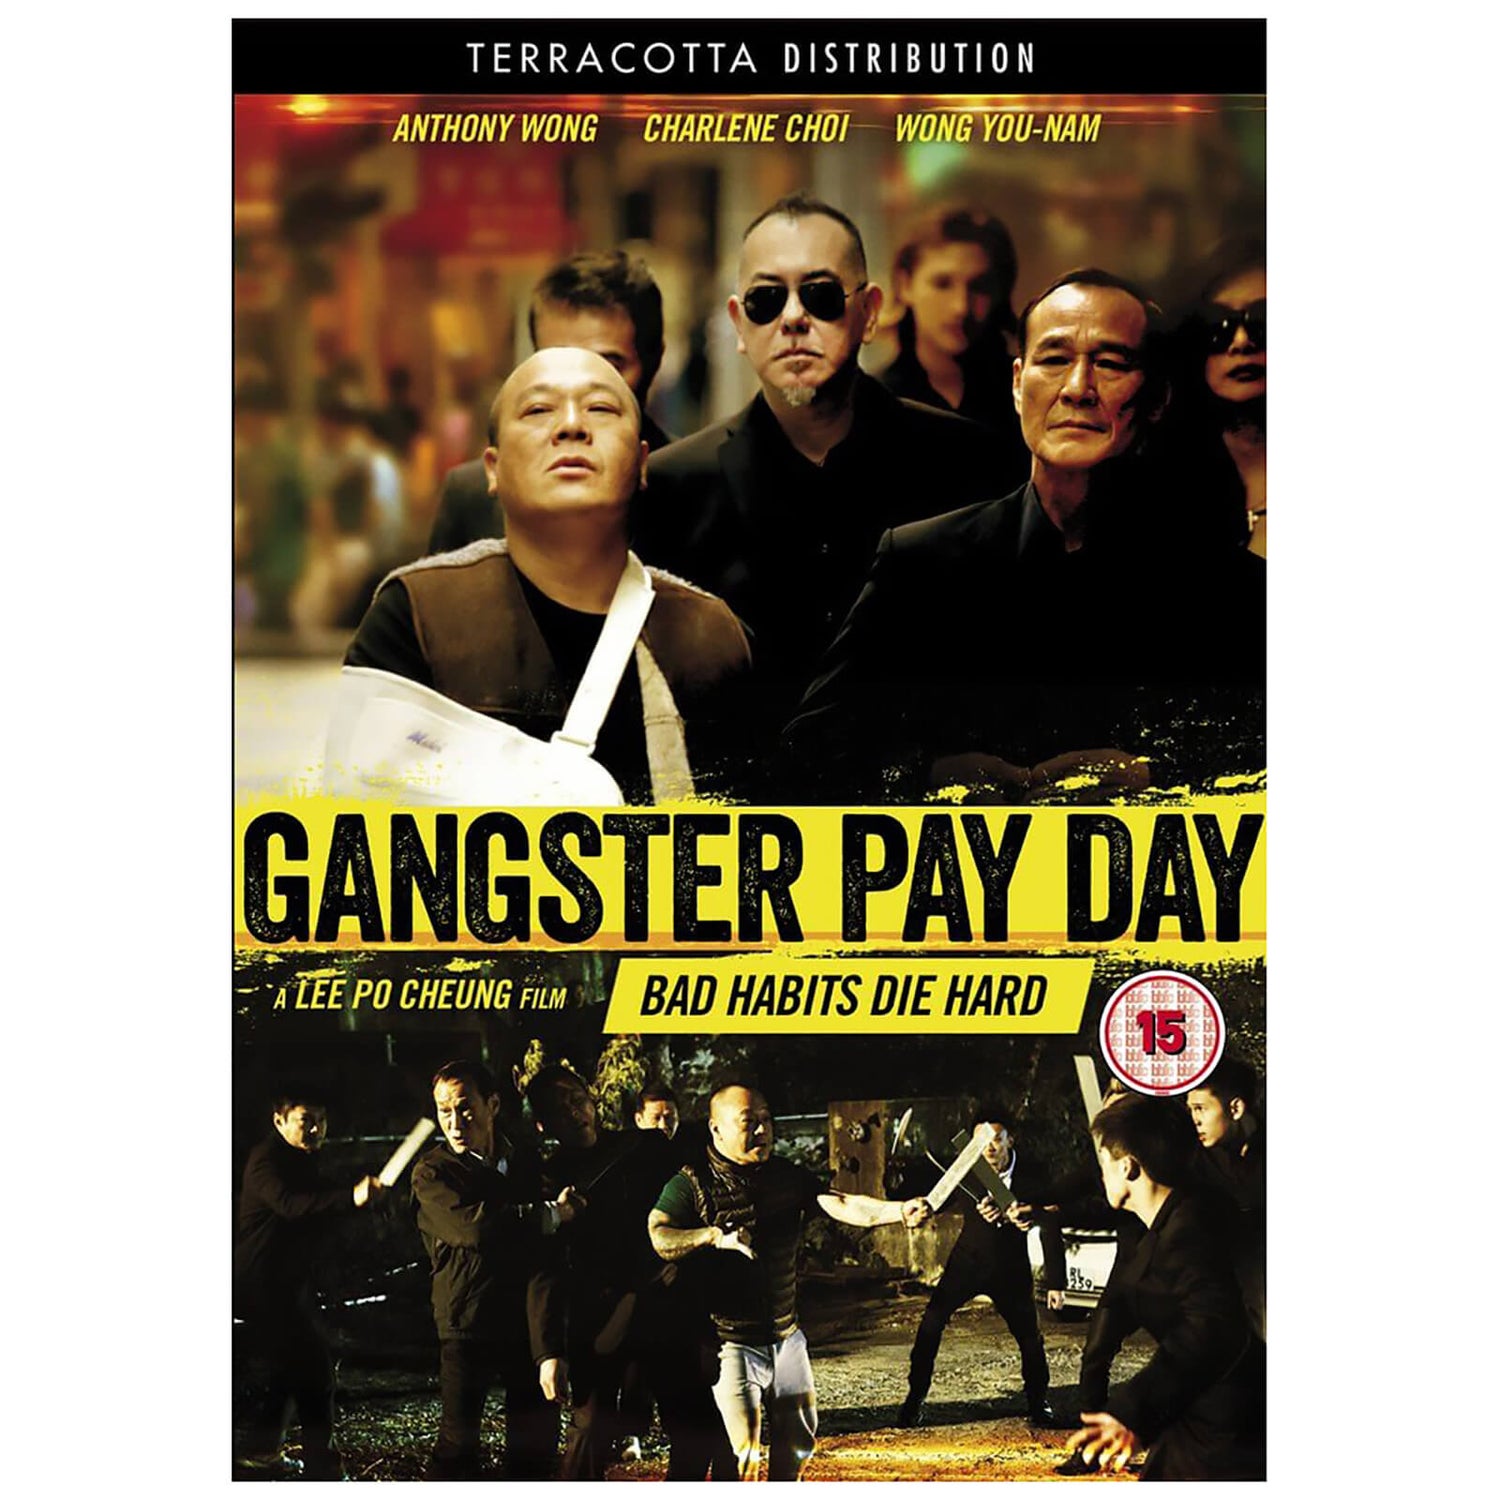 Gangster Payday